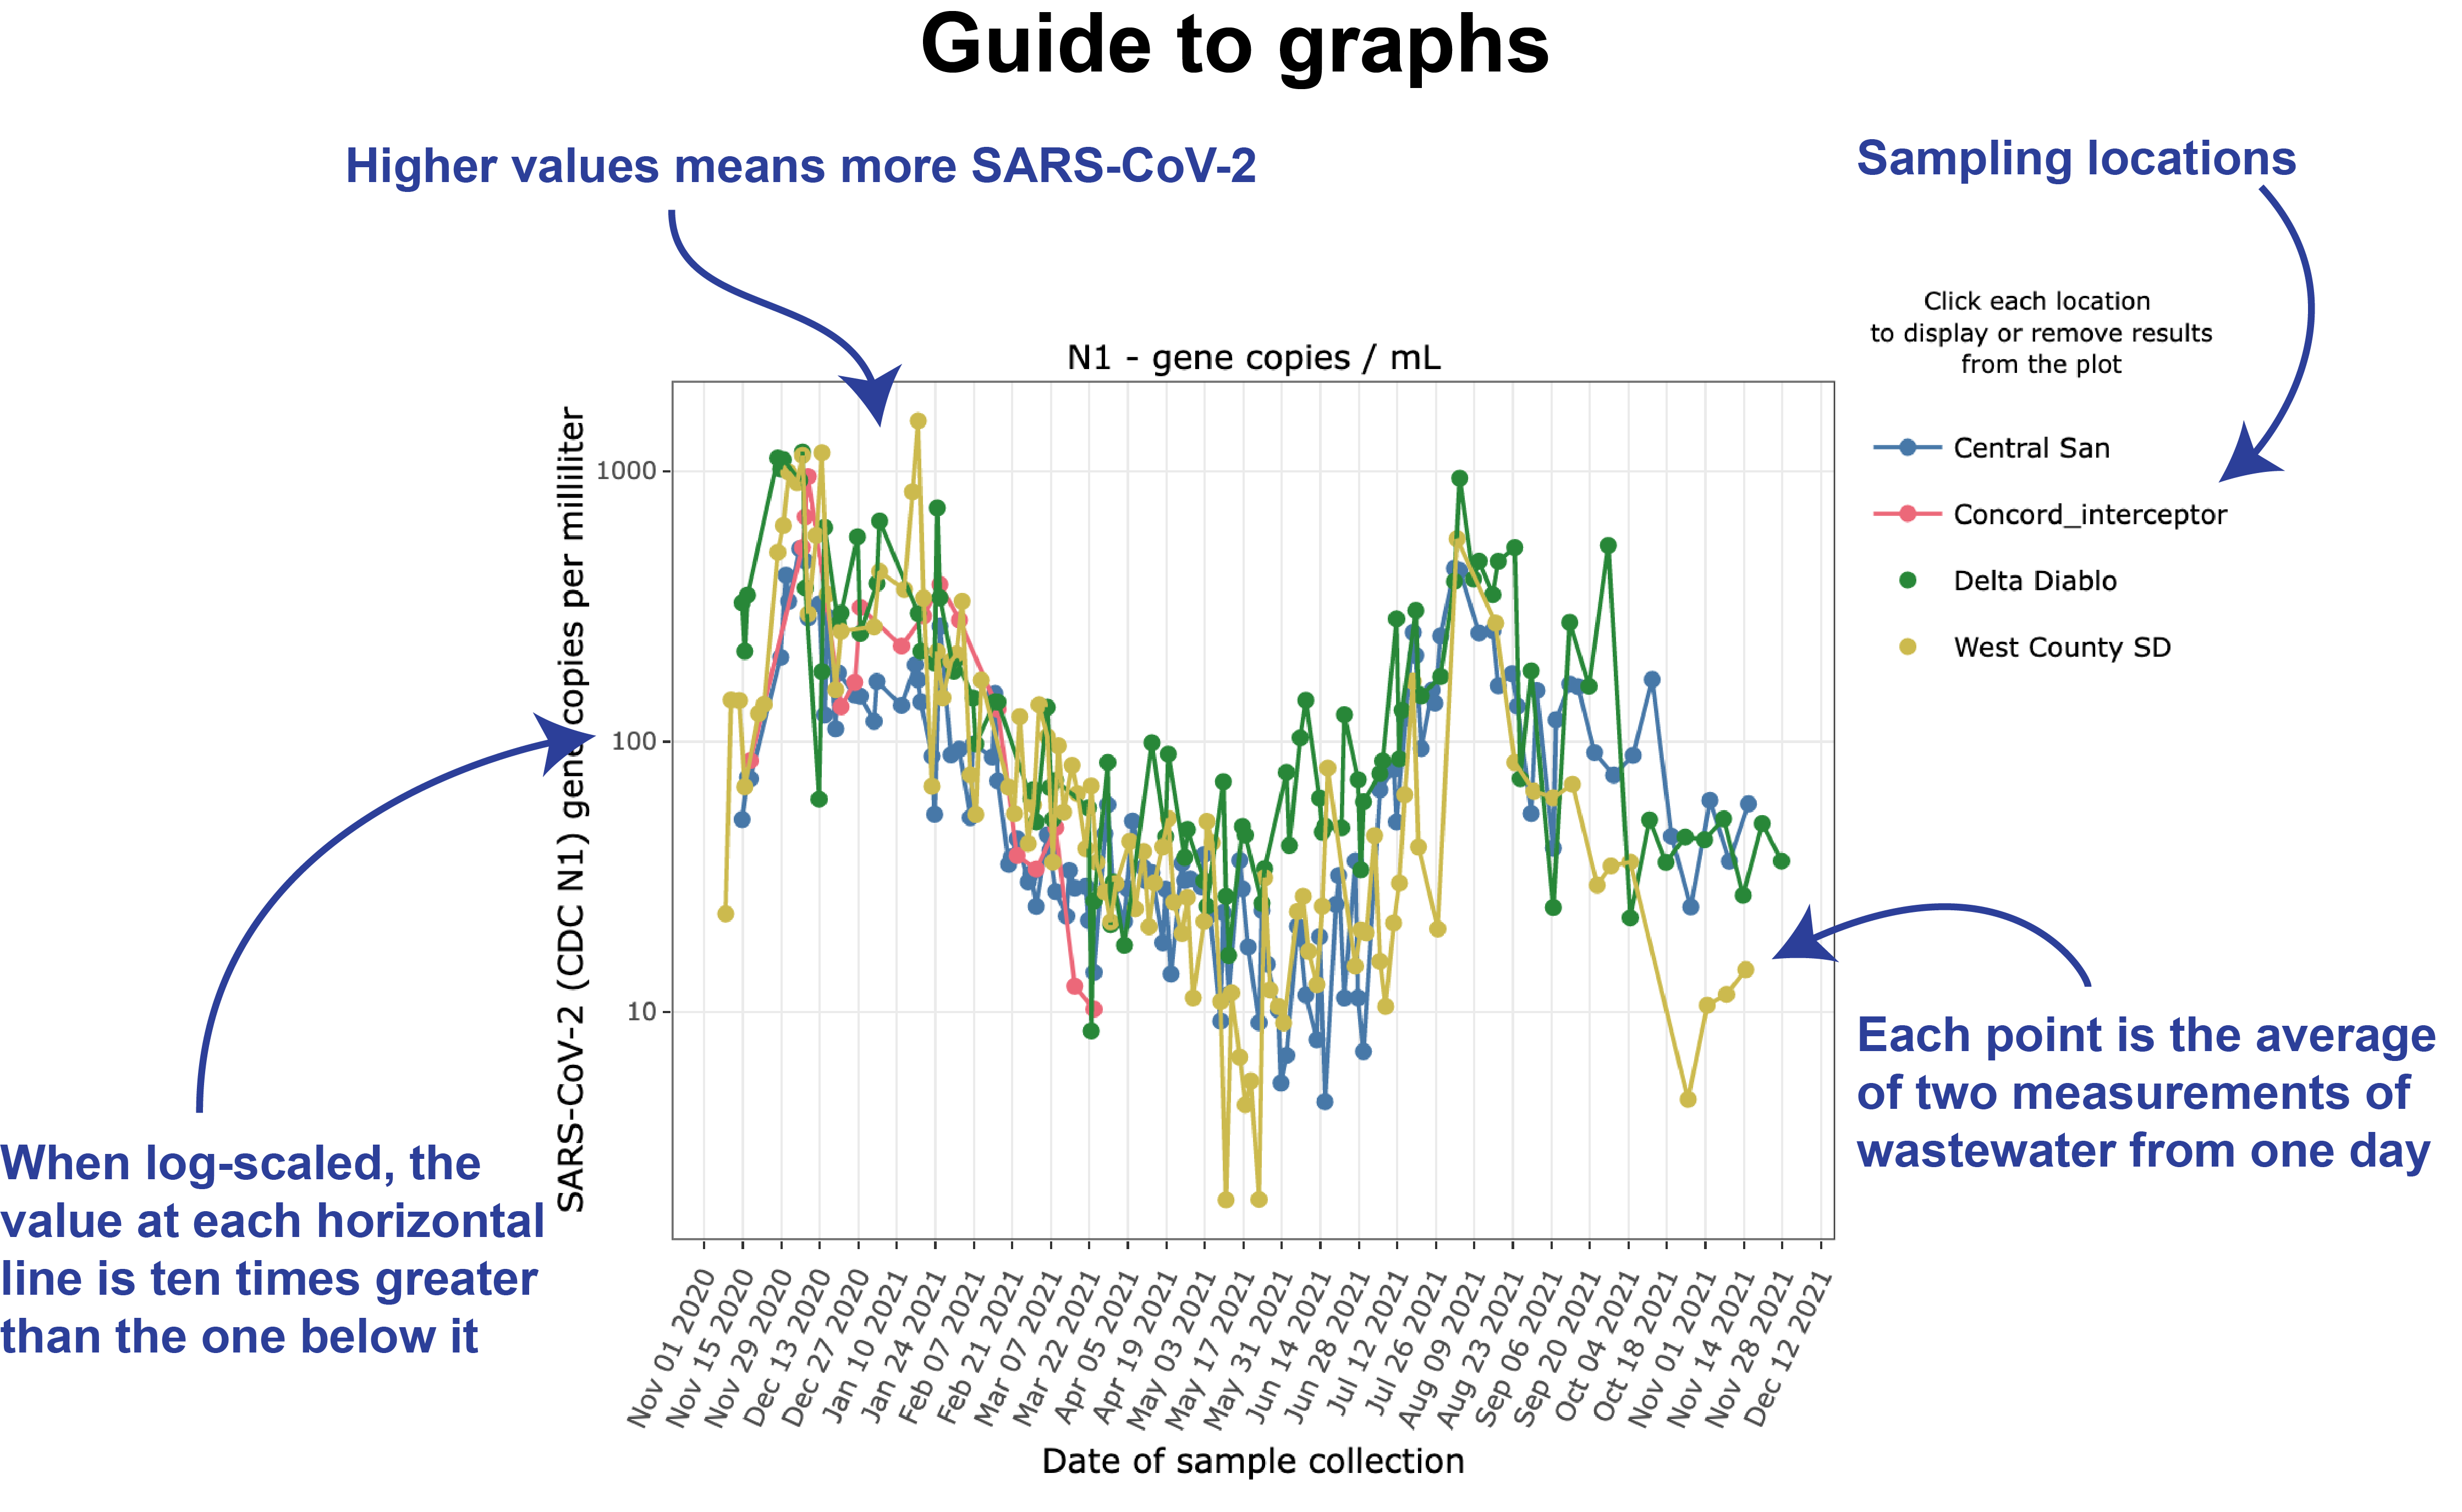 Image of graph with annotations indicating sampling locations, values displayed in plots, and log vs linear scale